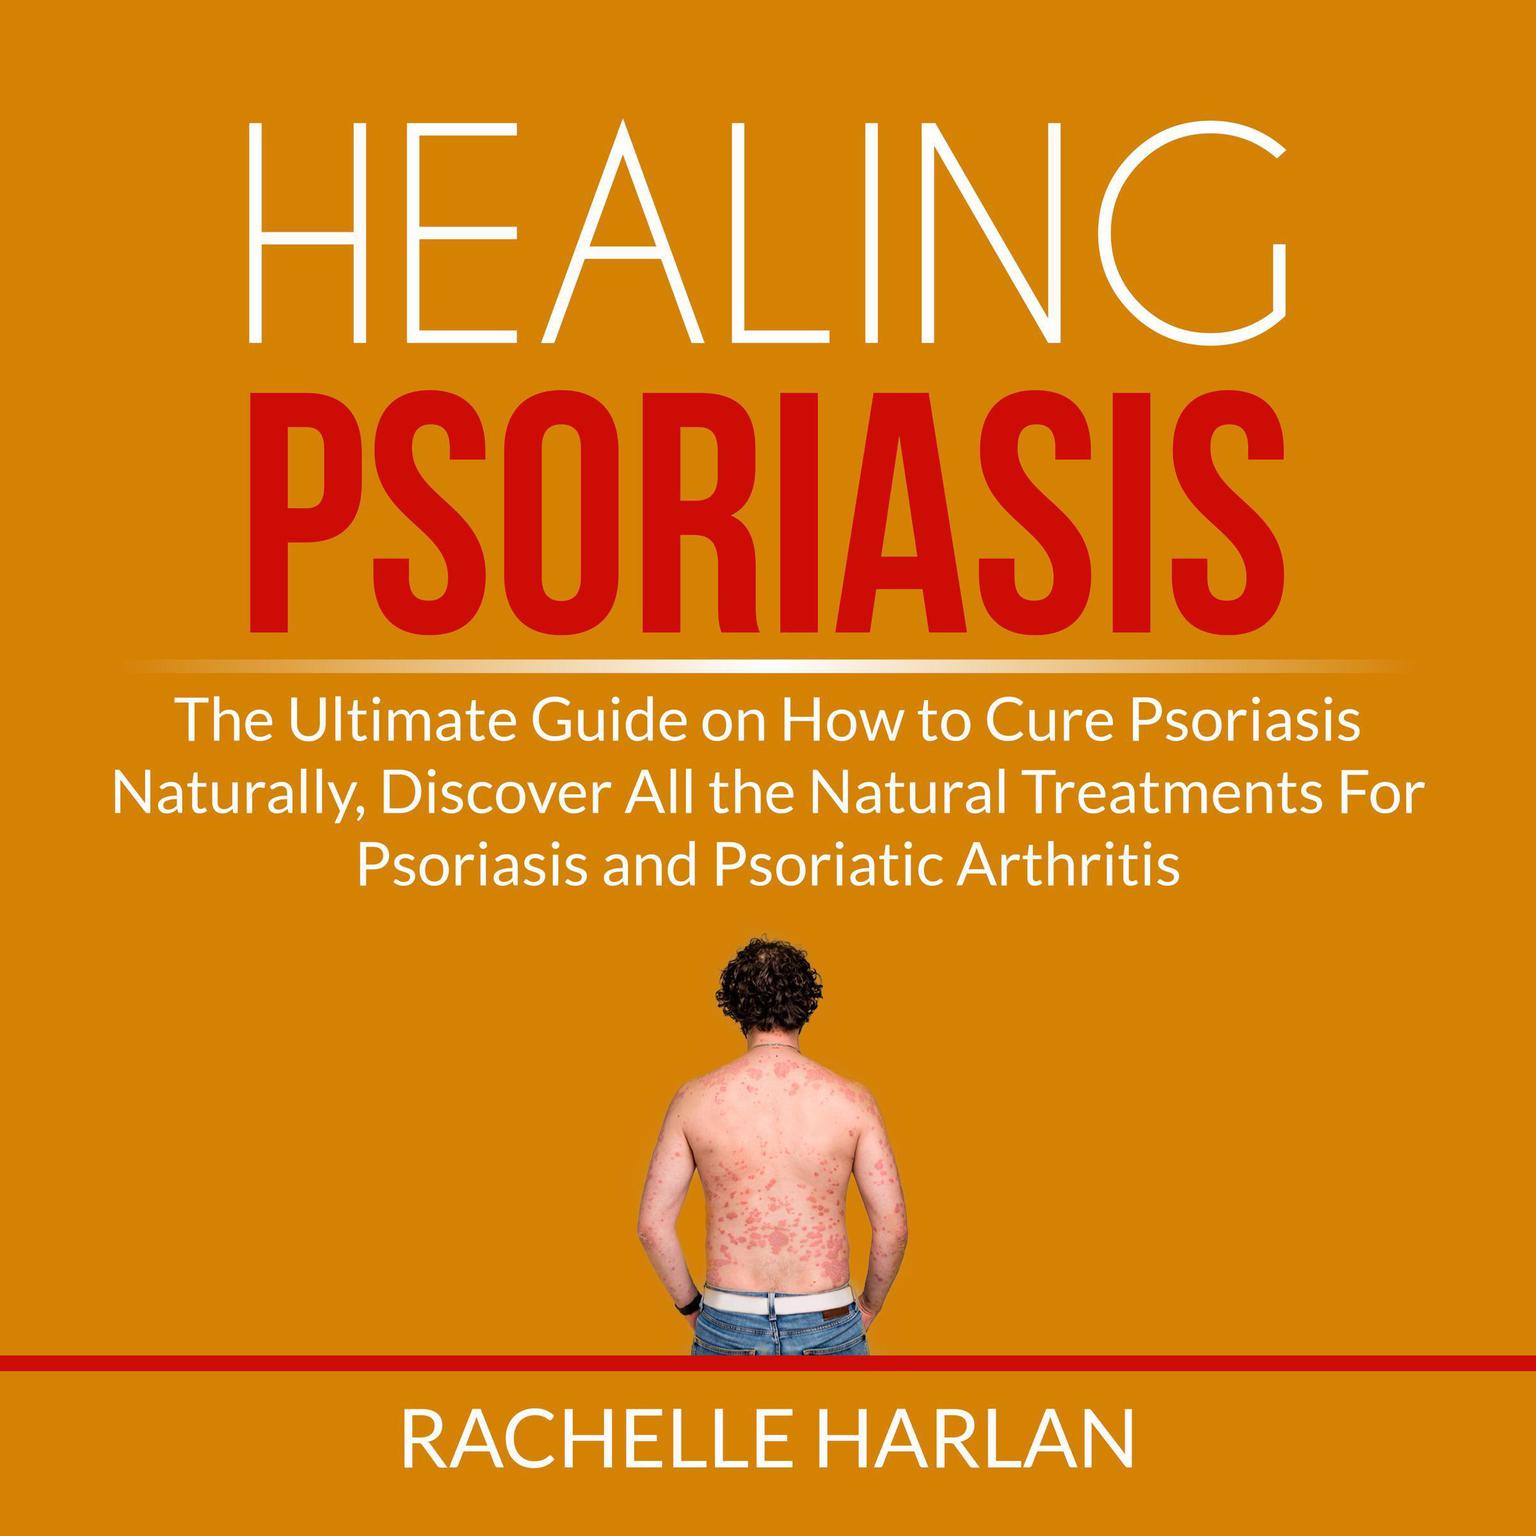 Healing Psoriasis: The Ultimate Guide on How to Cure Psoriasis Naturally, Discover All the Natural Treatments For Psoriasis and Psoriatic Arthritis Audiobook, by Rachelle Harlan